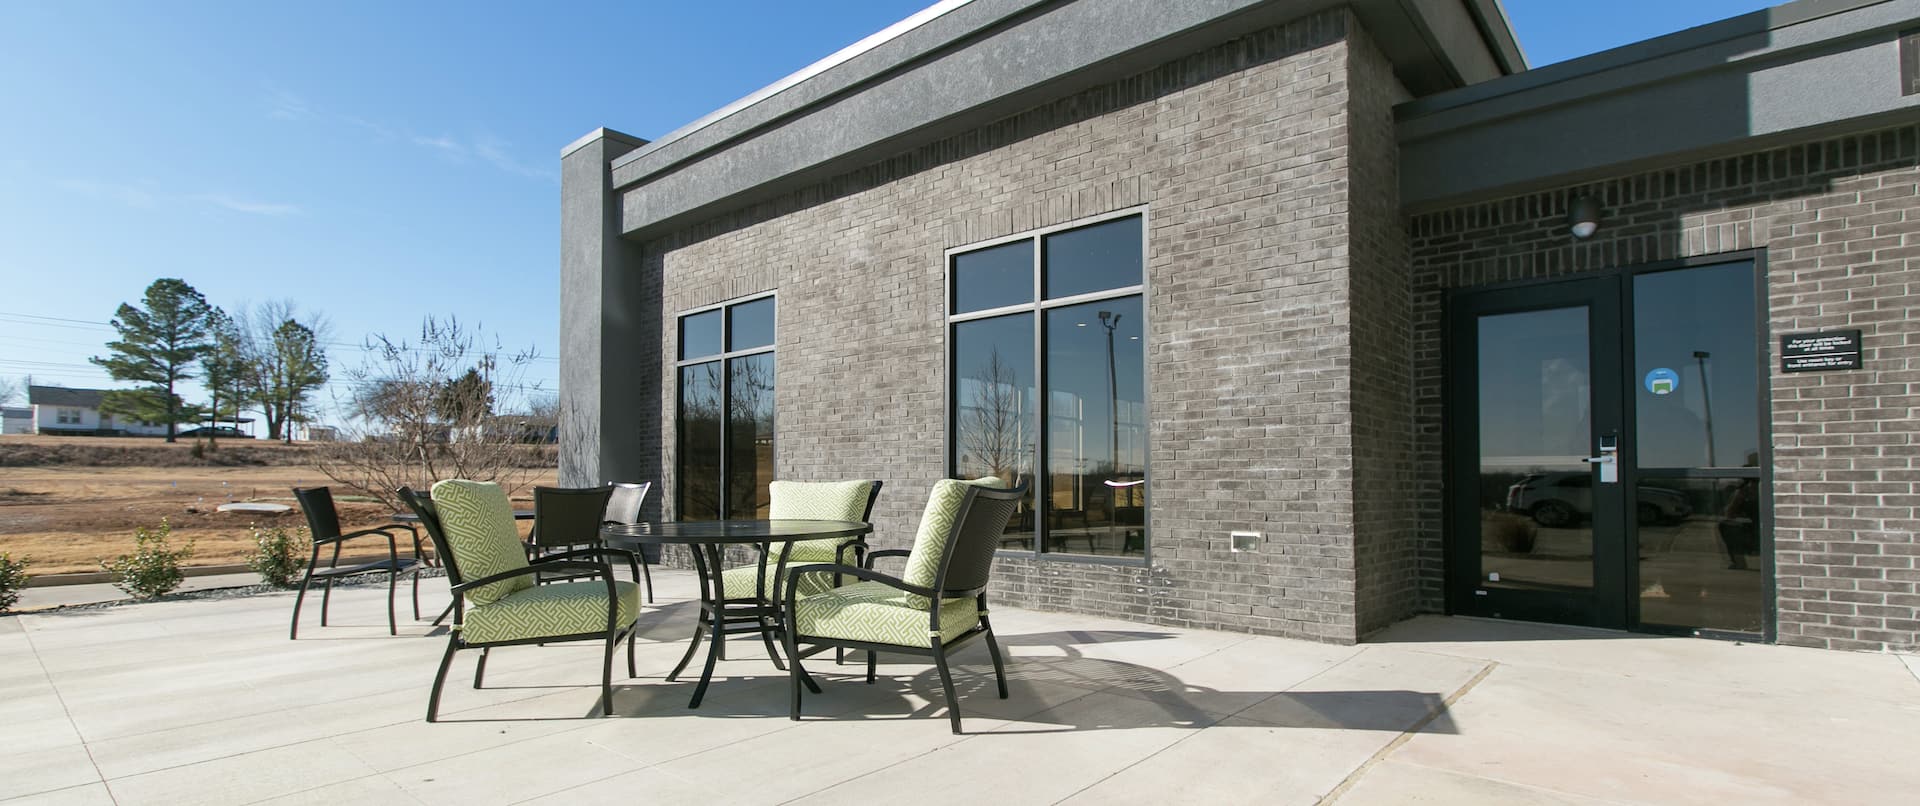 Outdoor patio area with seating